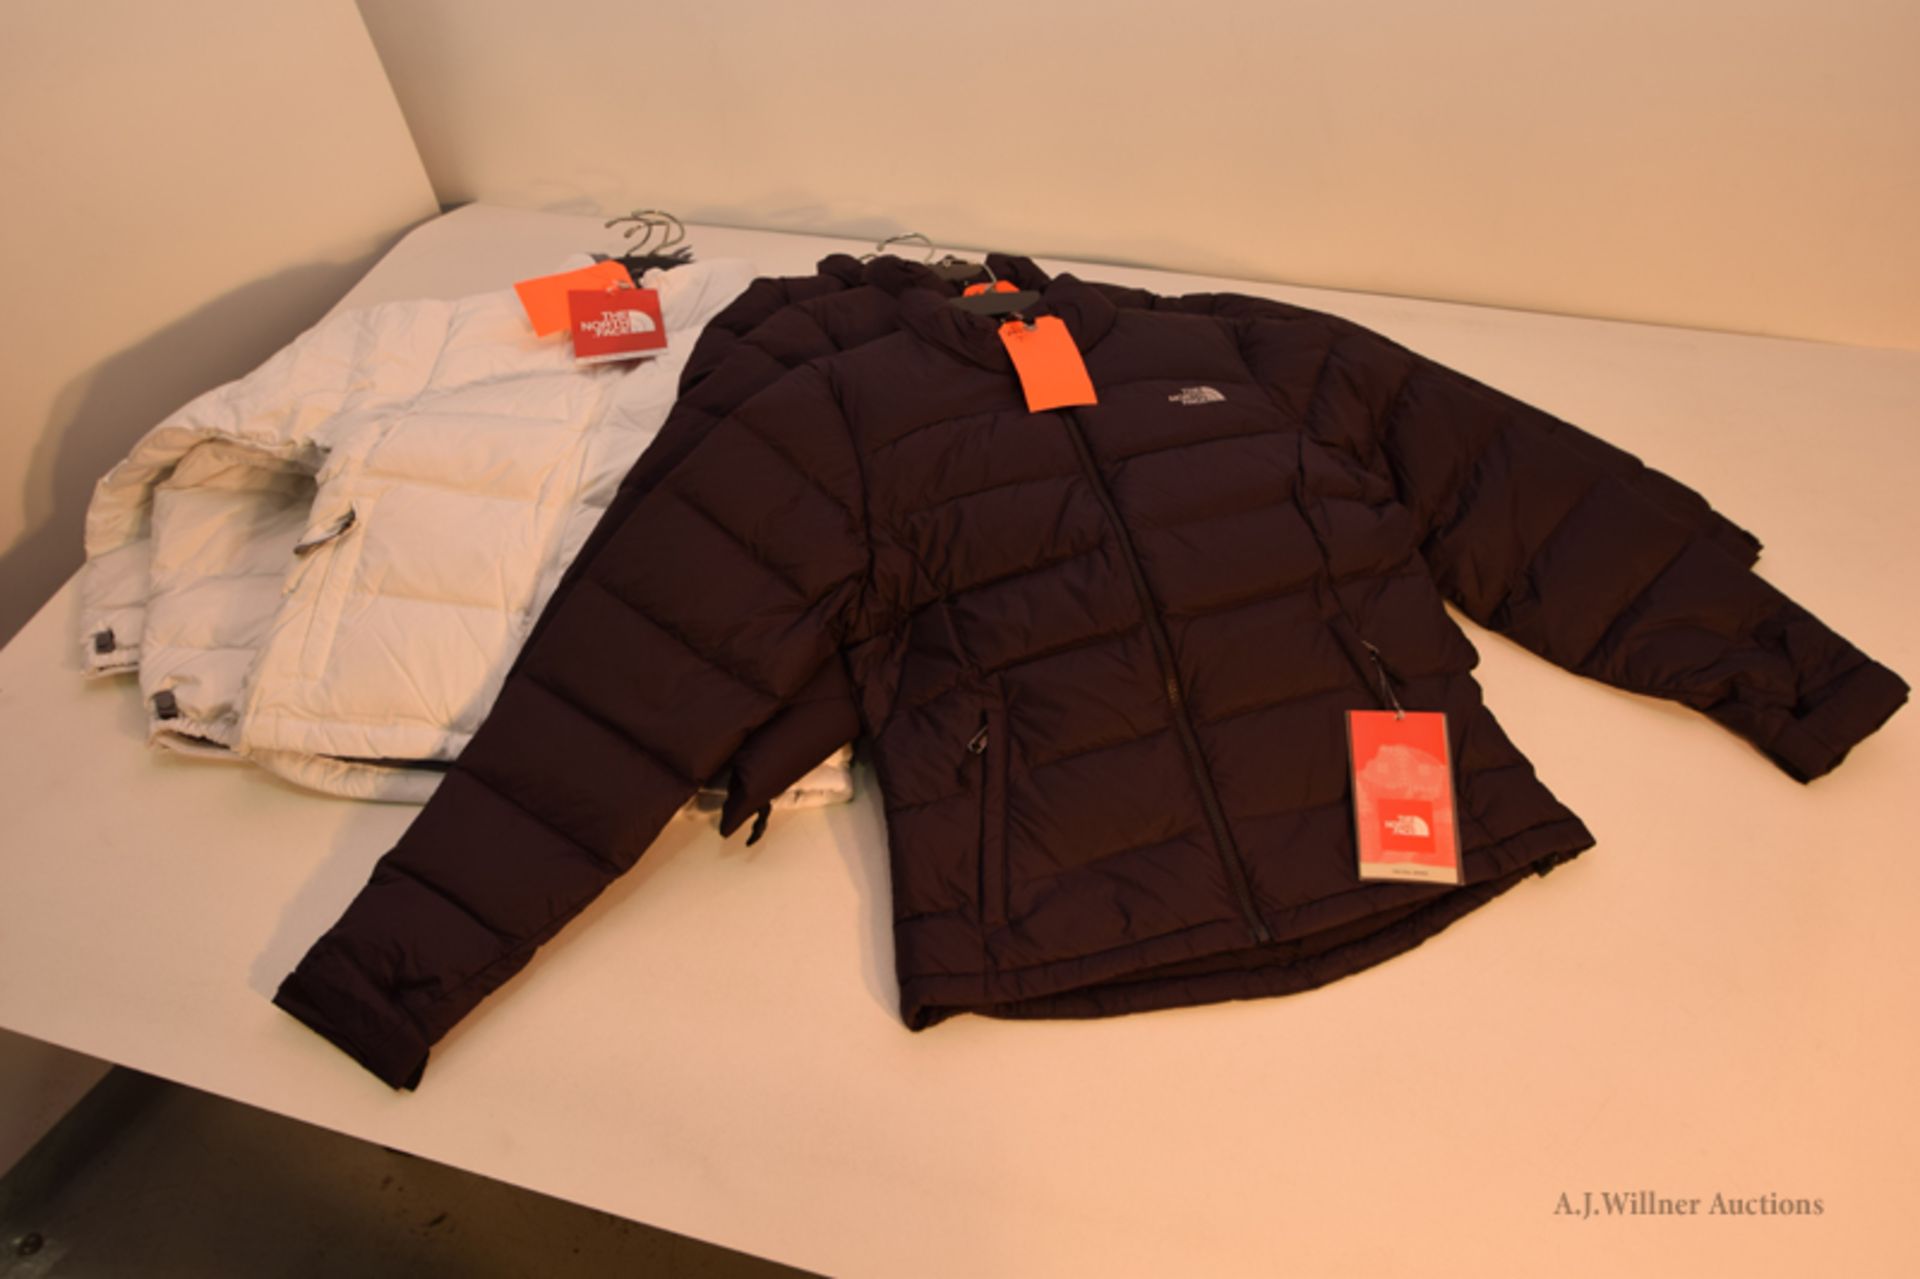 The North Face Clothing - Image 6 of 6